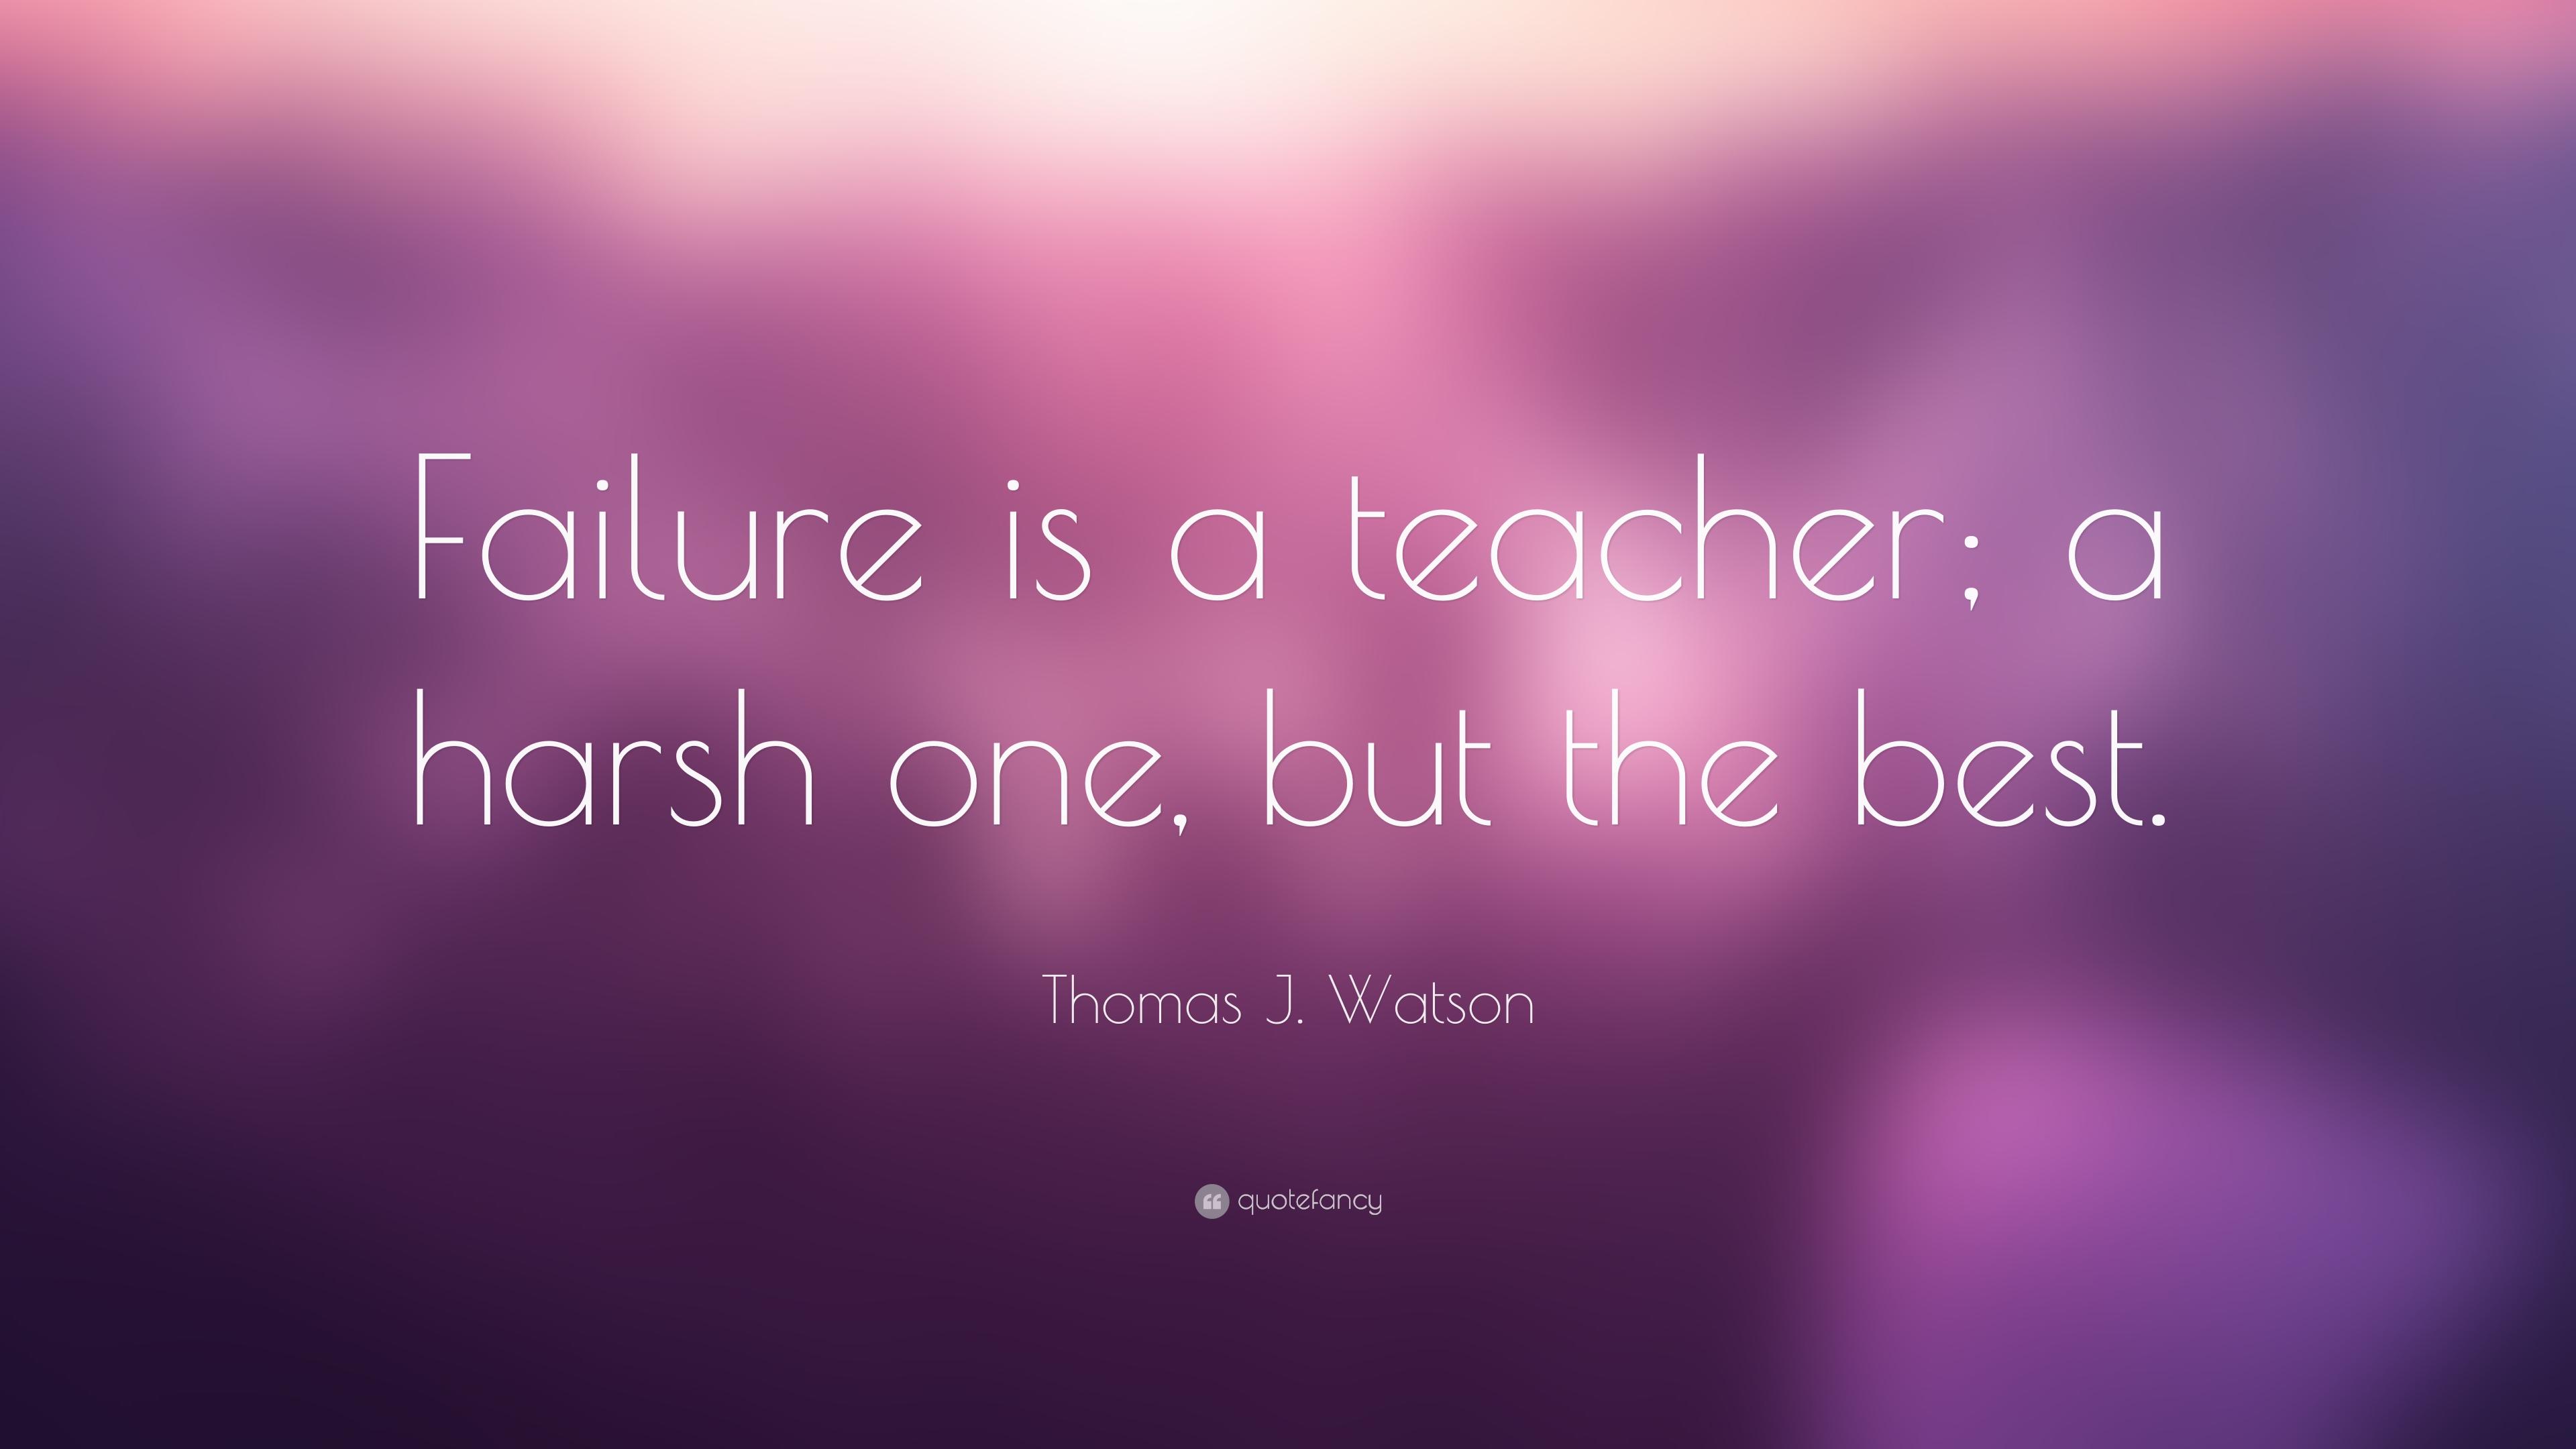 Thomas J. Watson Quote: “Failure is a teacher; a harsh one, but